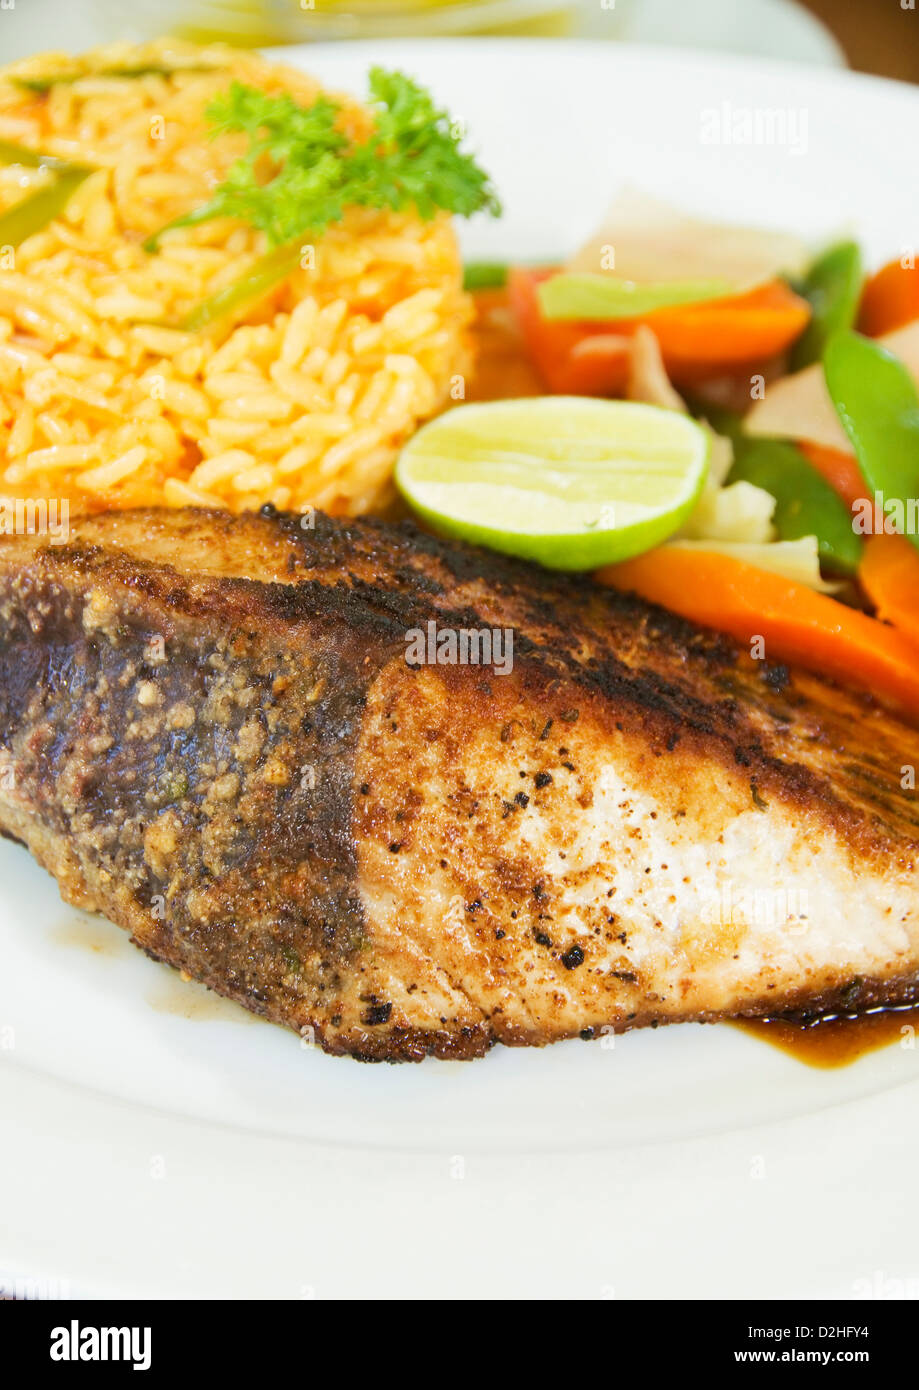 fresh Caribbean style yellowfin tuna steak with vegetables rice as photographed in Union Island St. Vincent and the Grenadines Stock Photo